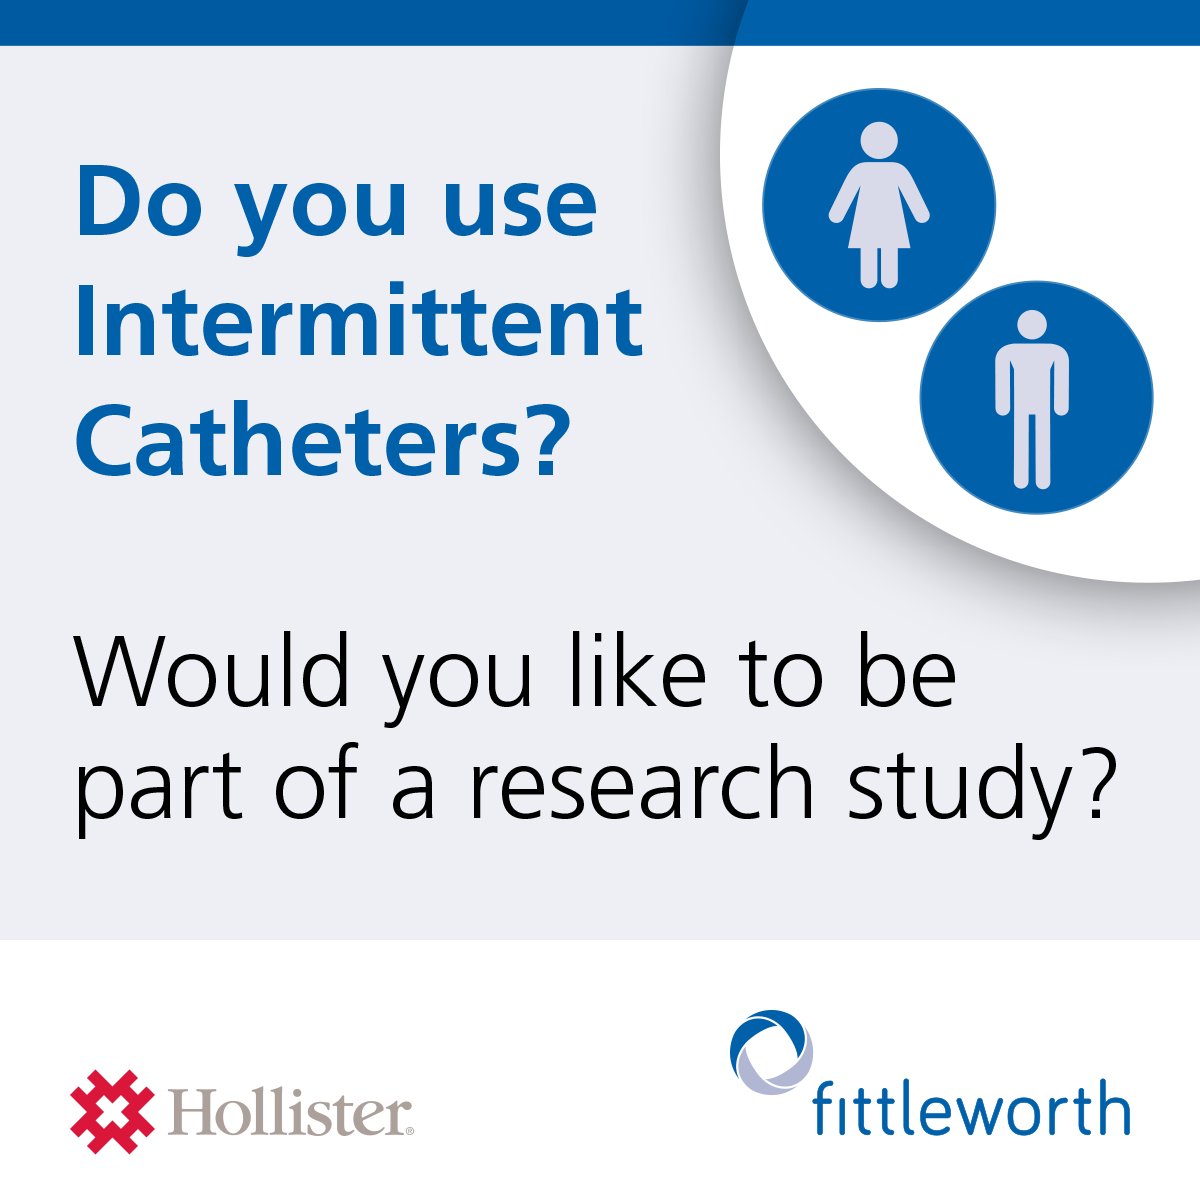 Would you like to contribute to The ConCaRe online research study for intermittent catheter product users? The aim of this study is to develop a better understanding of the lives of people with urinary retention and incomplete bladder emptying. Visit link.hollister.com/3vjMi3D